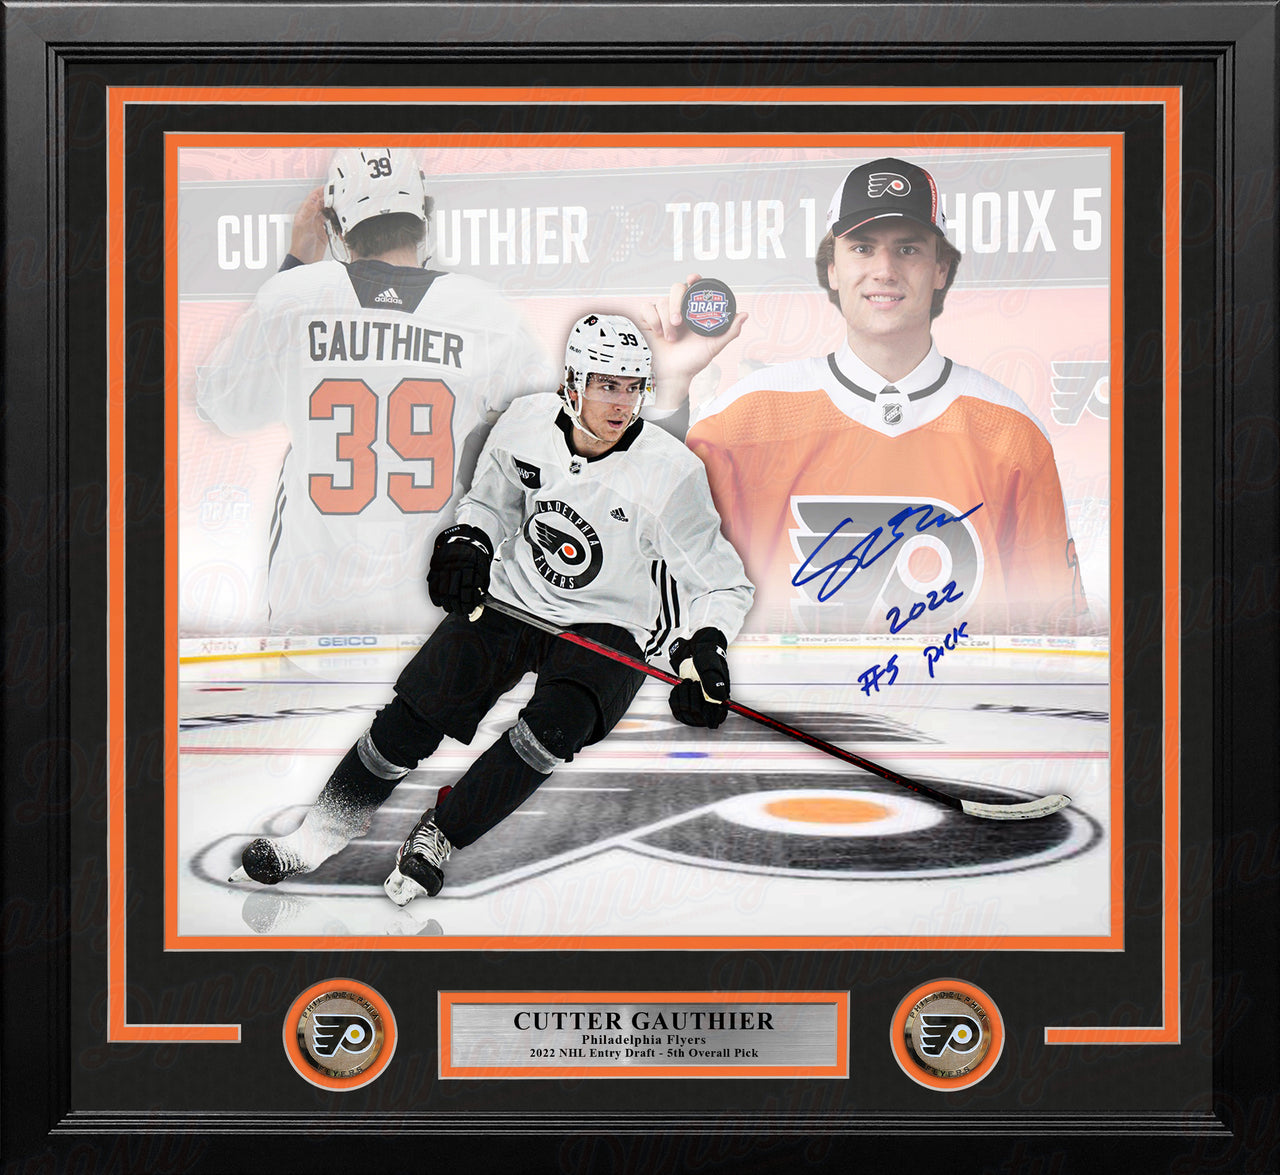 Cutter Gauthier Philadelphia Flyers Autographed 11x14 Framed Draft Hockey Photo Inscribed #5 Pick - Dynasty Sports & Framing 